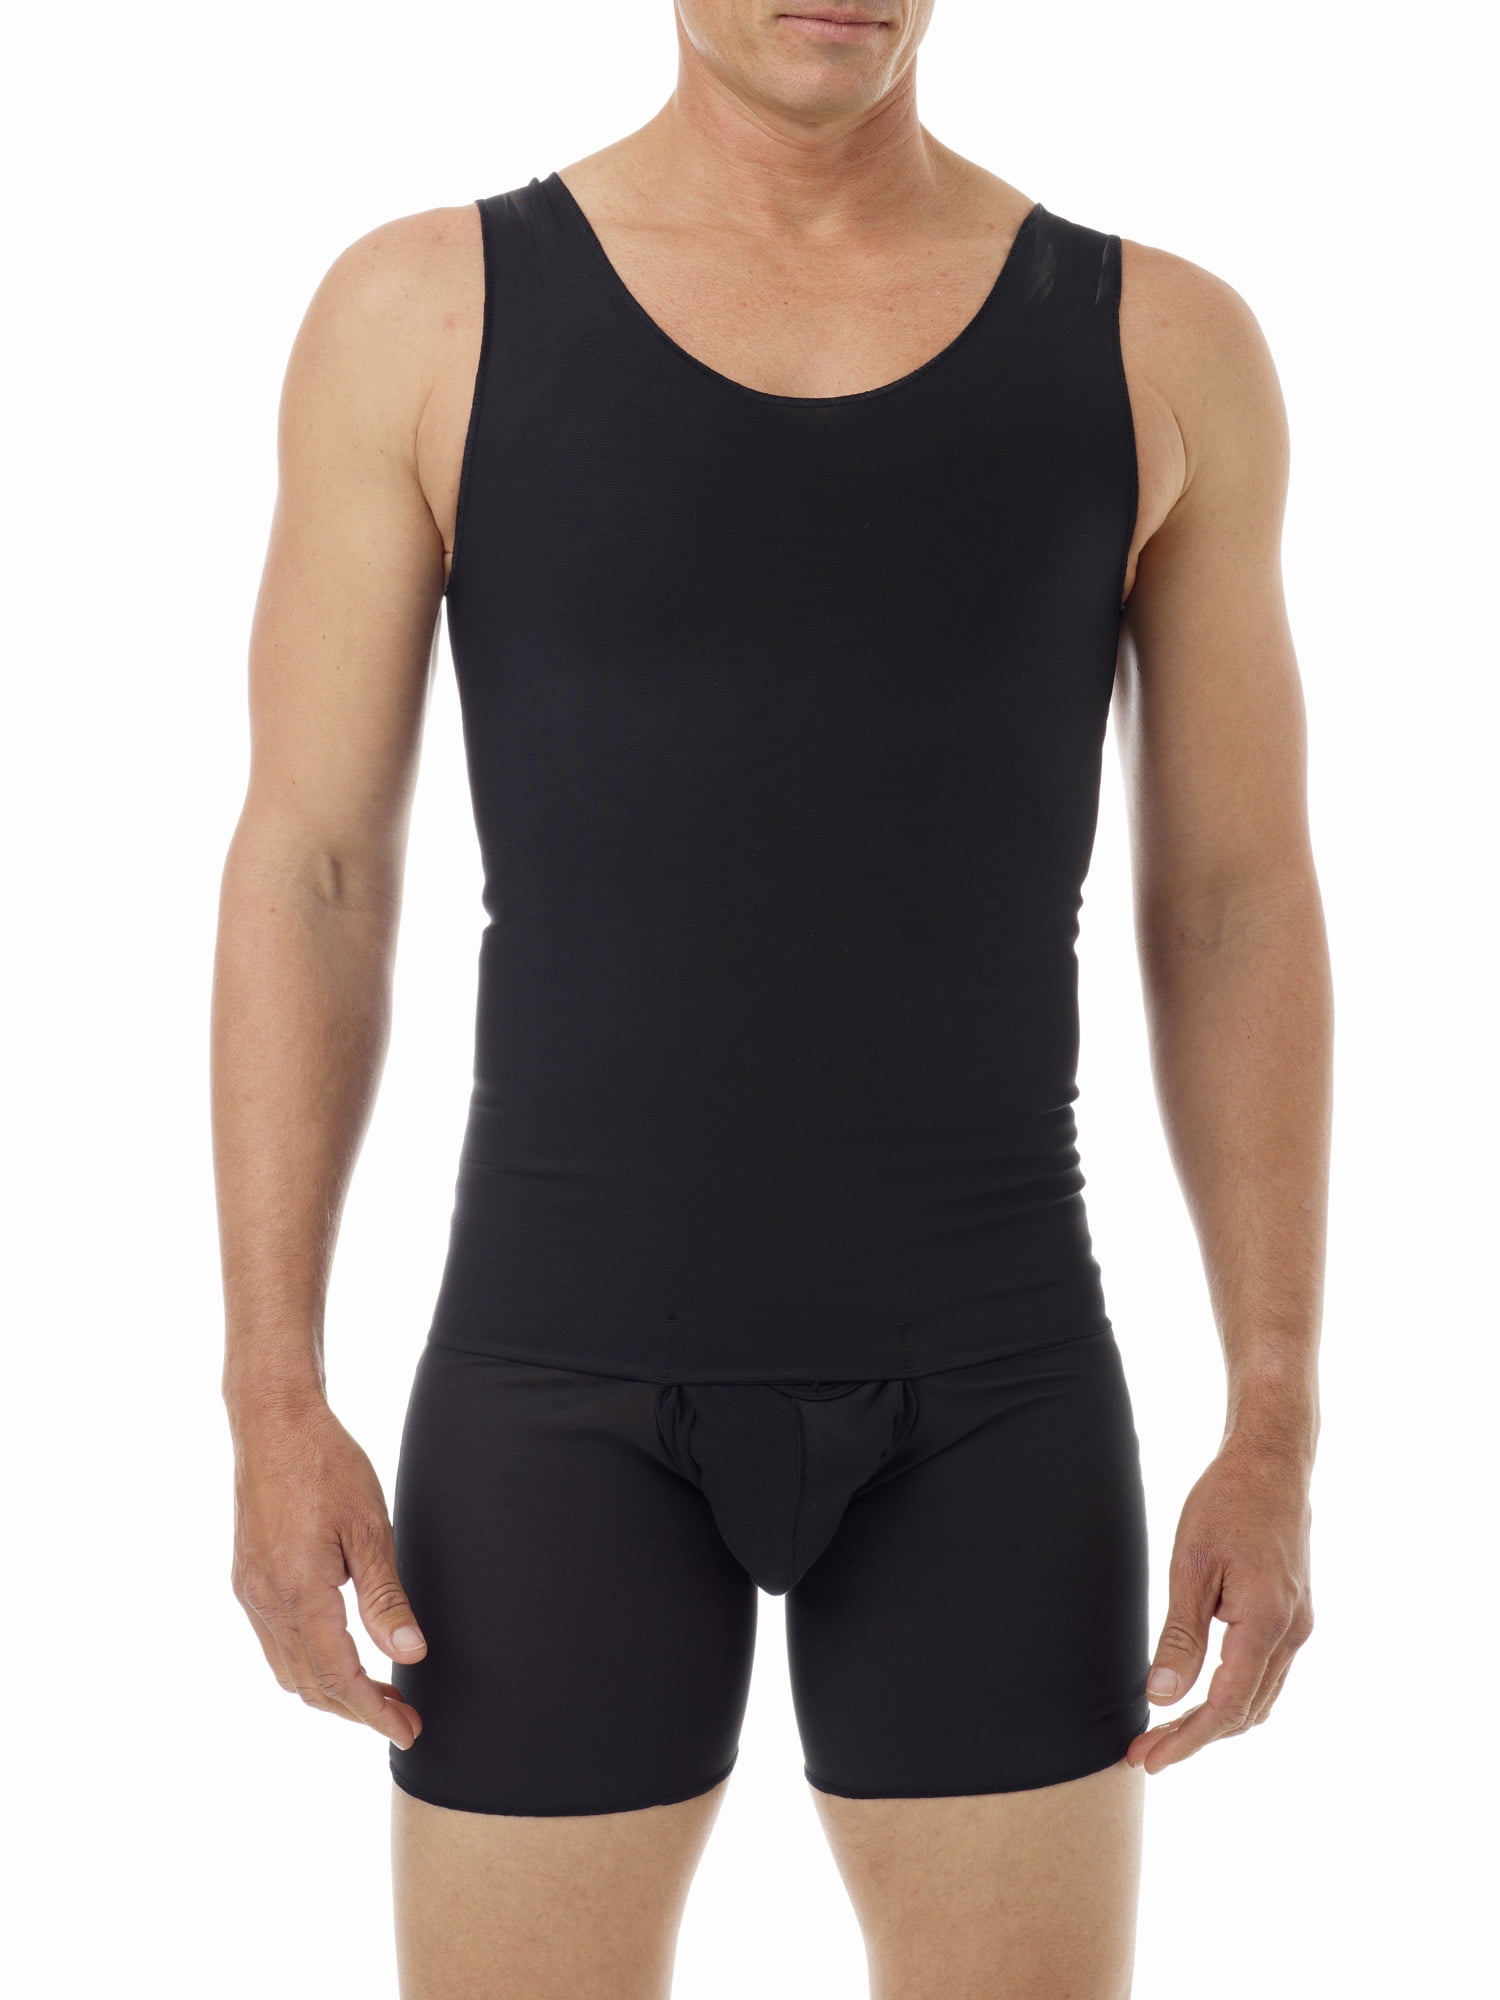 MENS BODY CONTOURING DUAL COMPRESSION UNDERSHIRT Small VALUE 3-pack  Black 